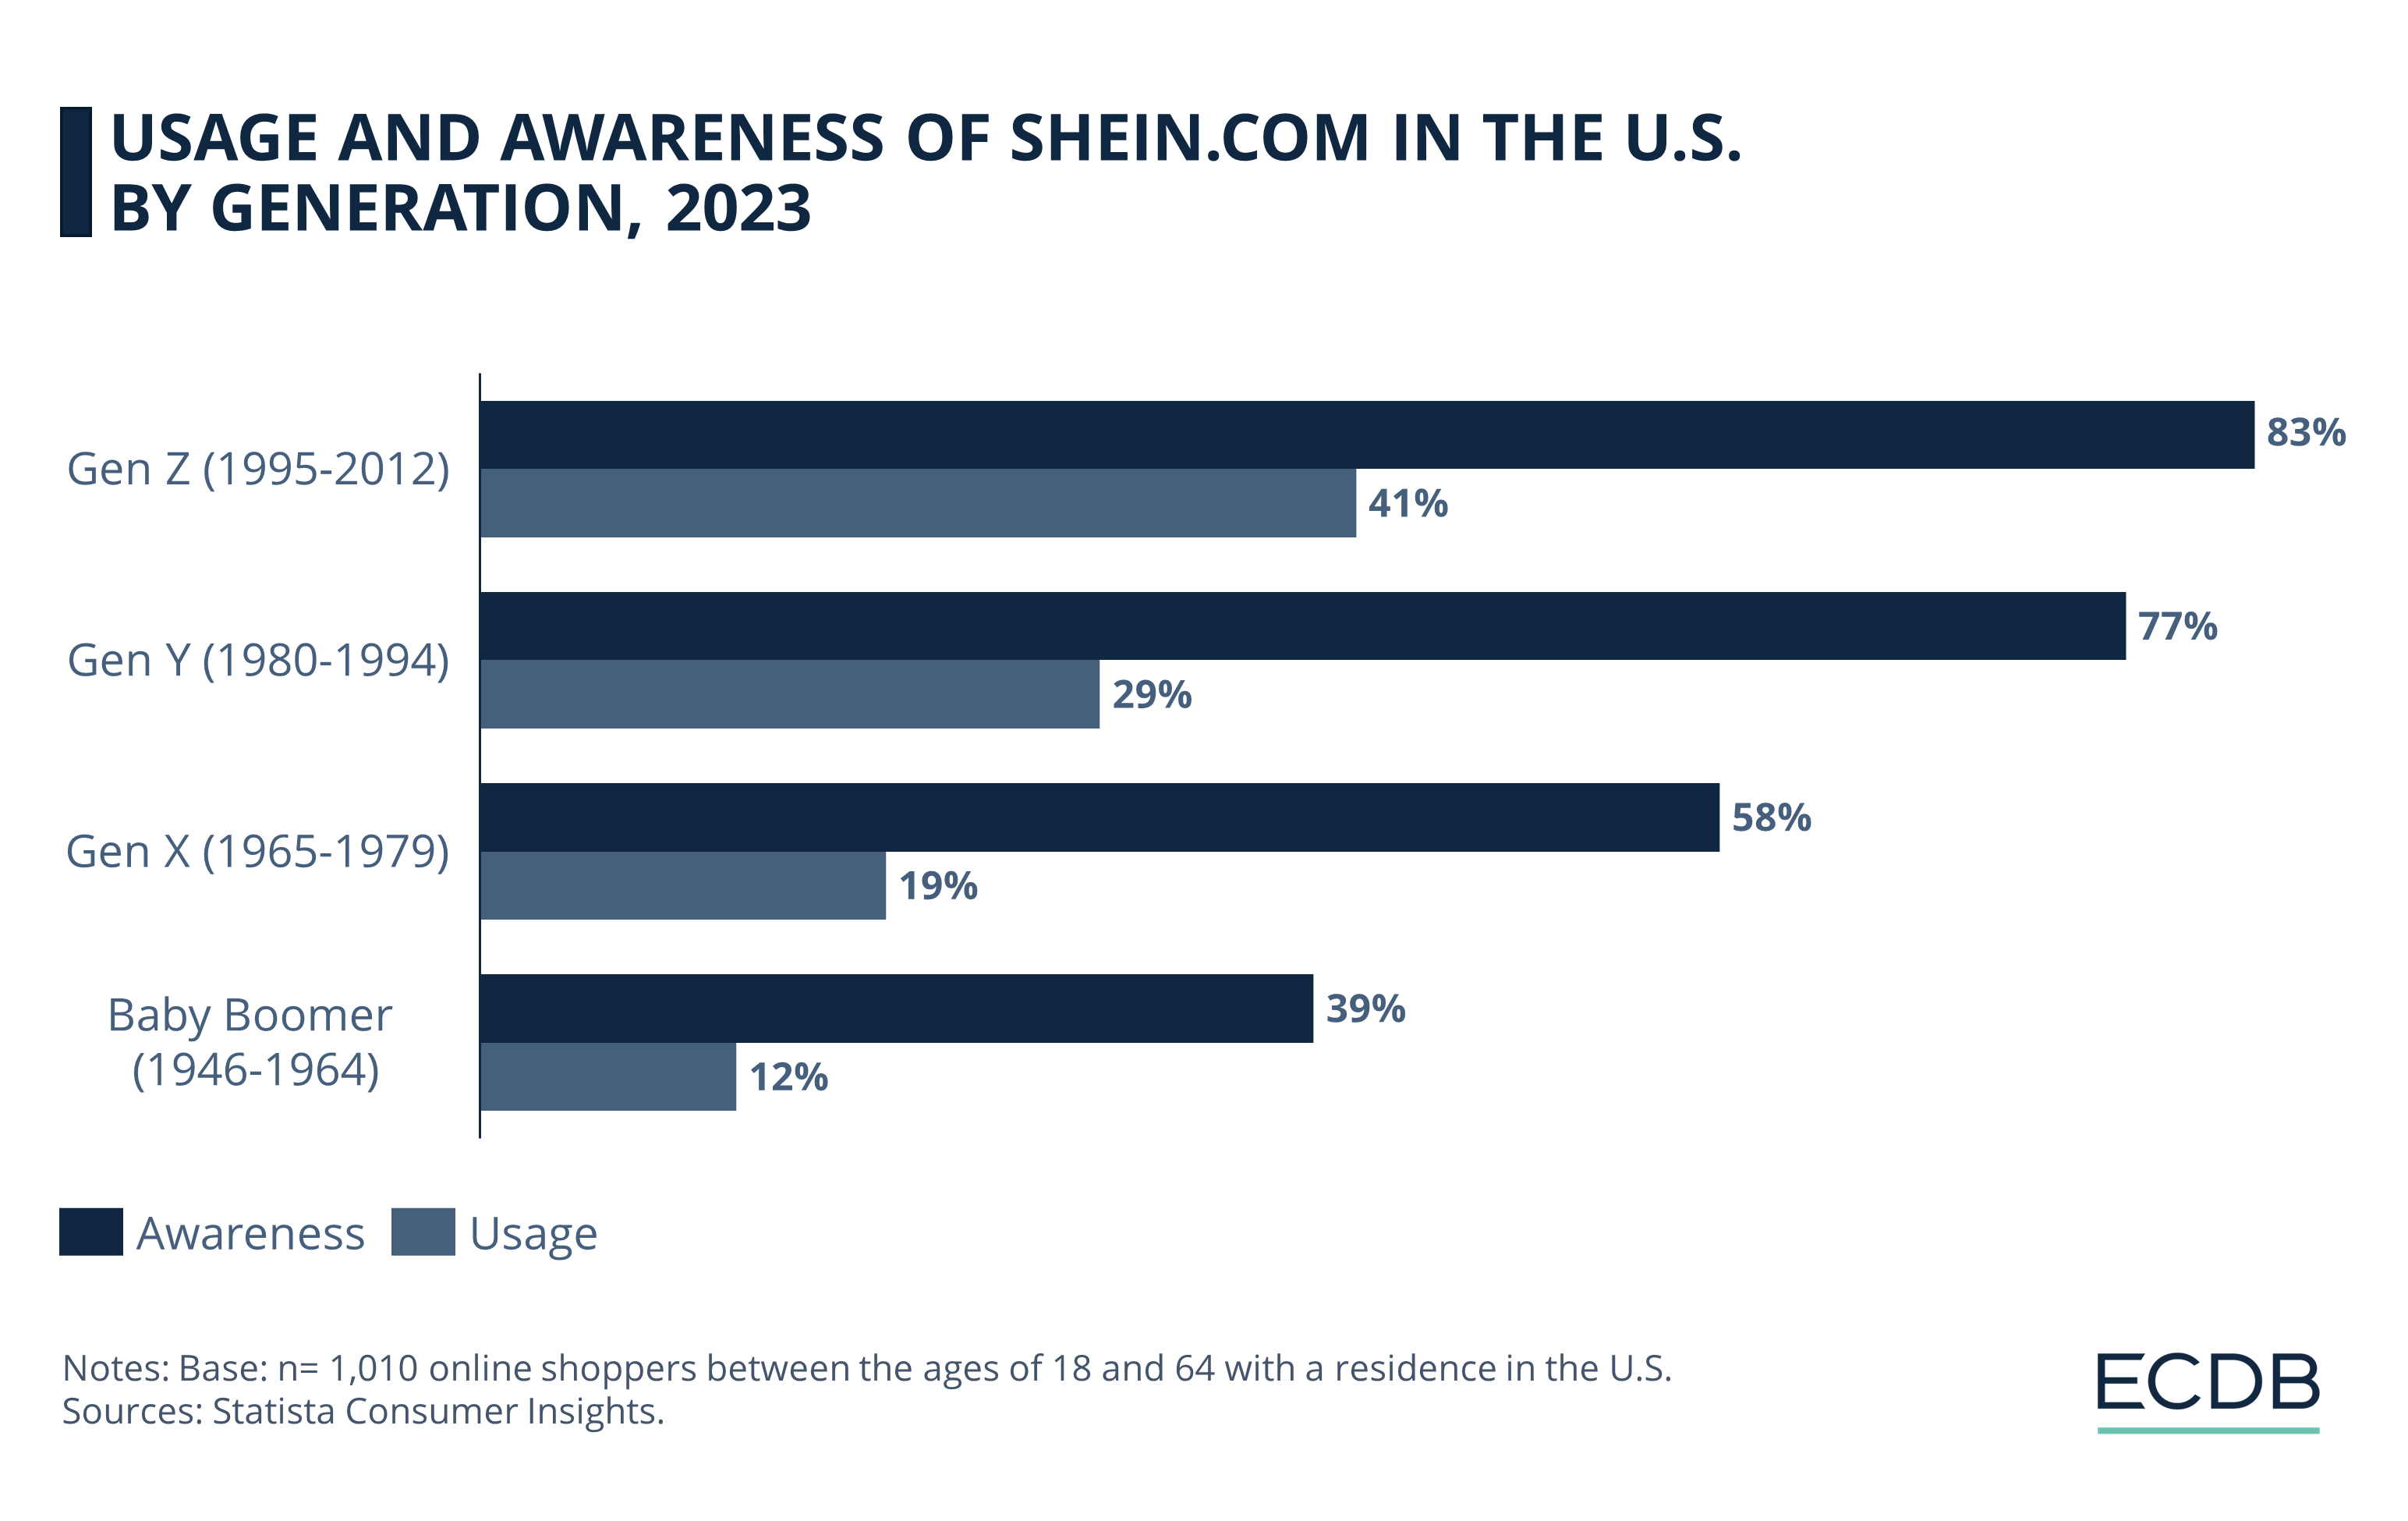 Usage and Awareness of Shein.com Among U.S. Consumers, per Generations